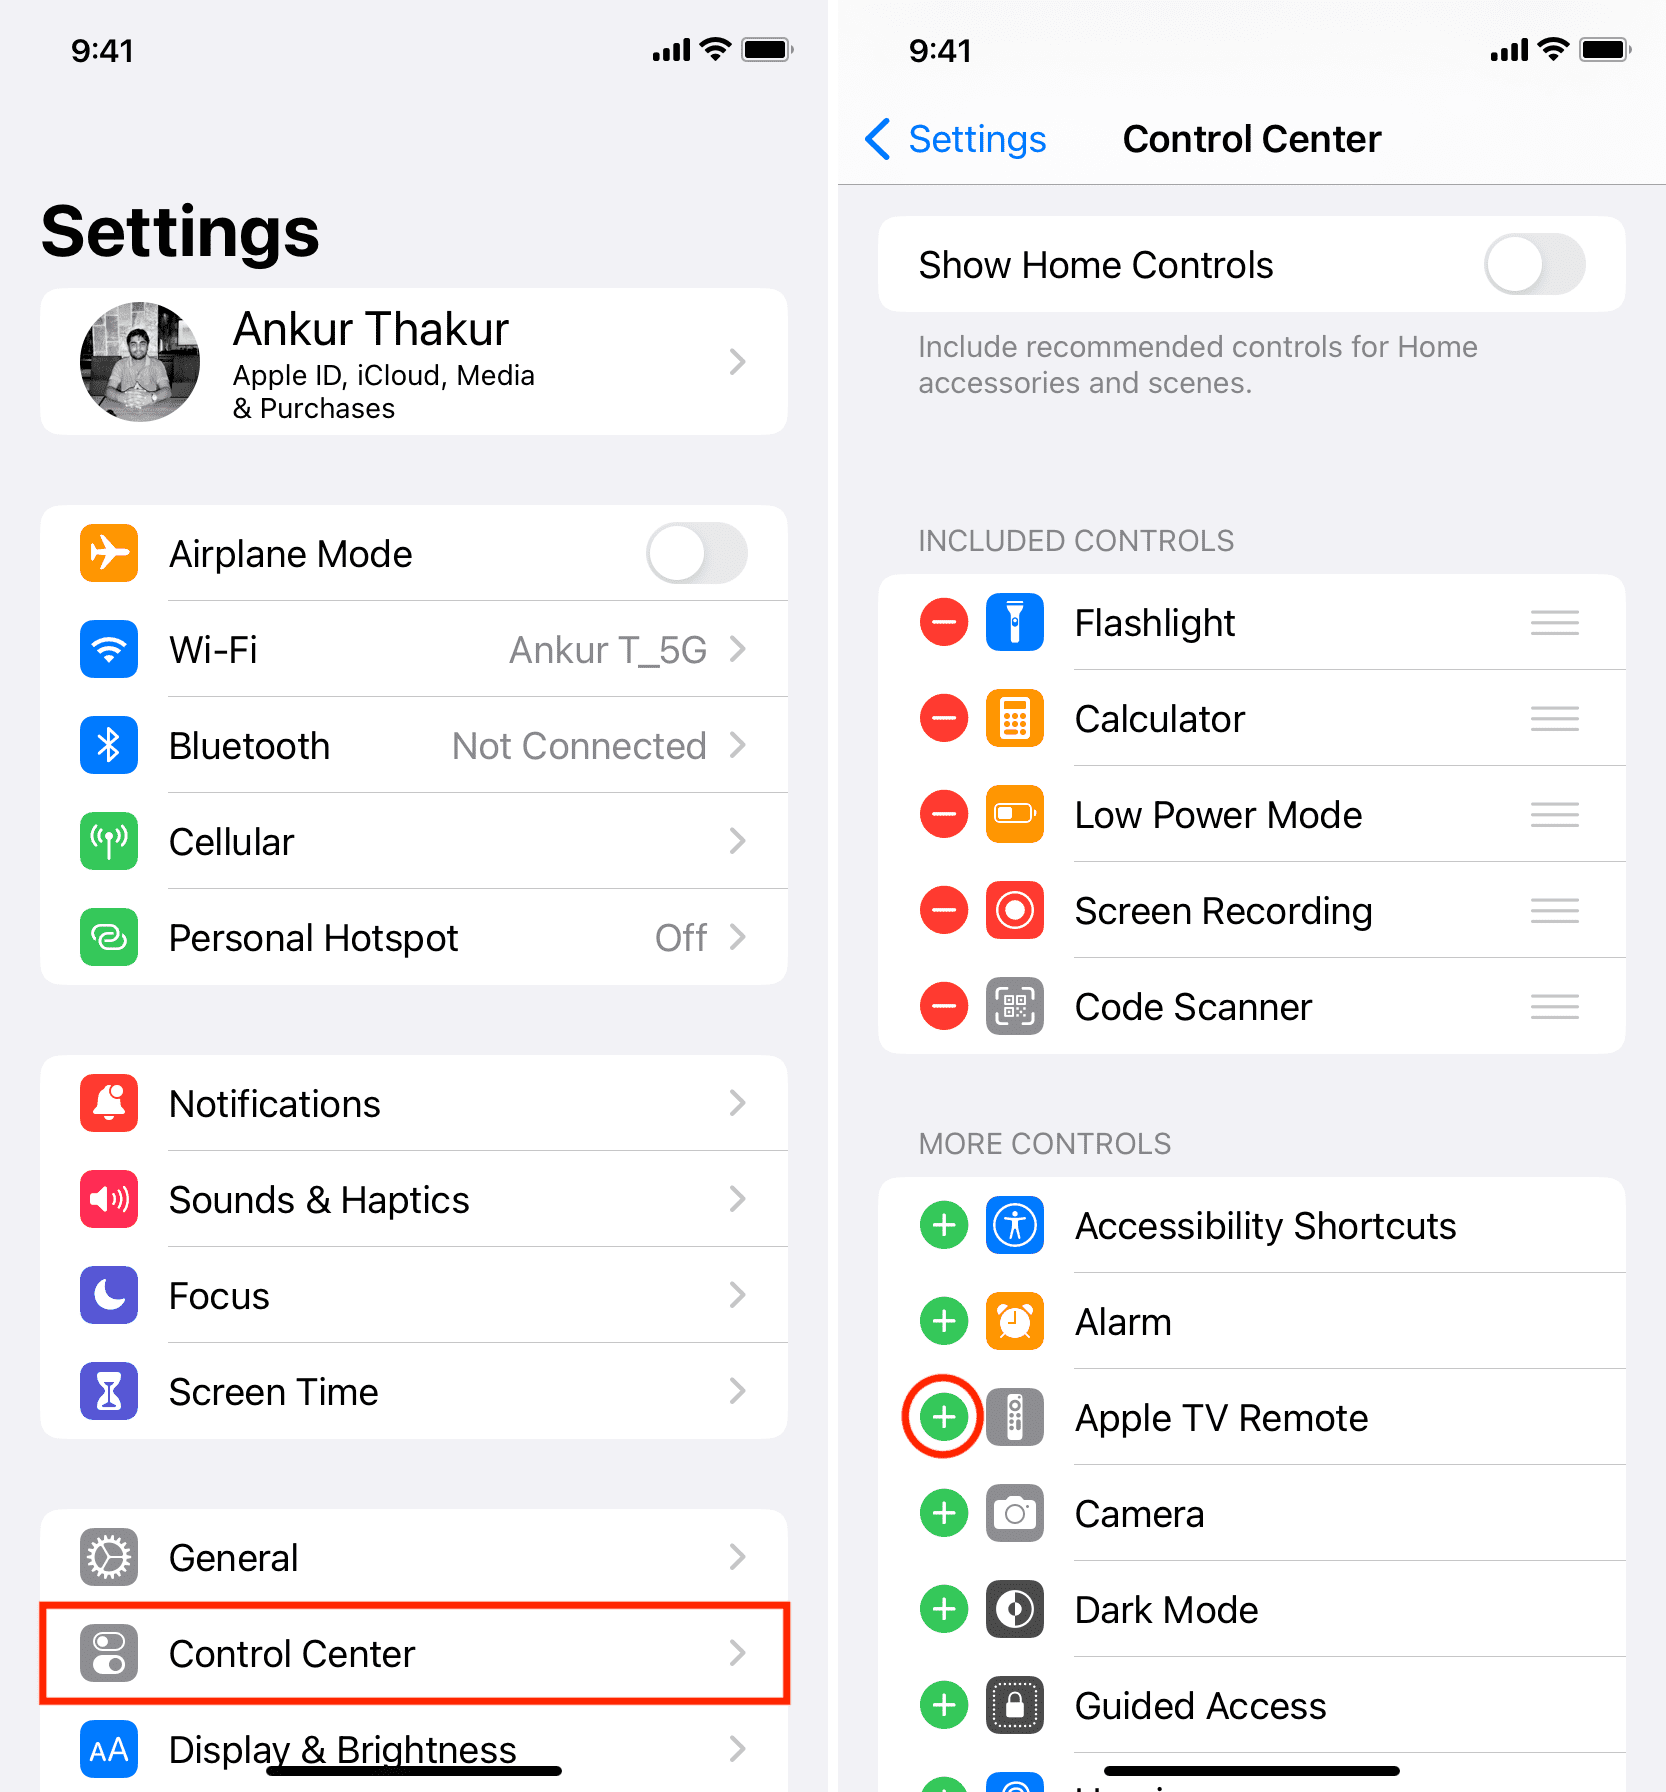 to set up and use your iPhone as Apple TV remote